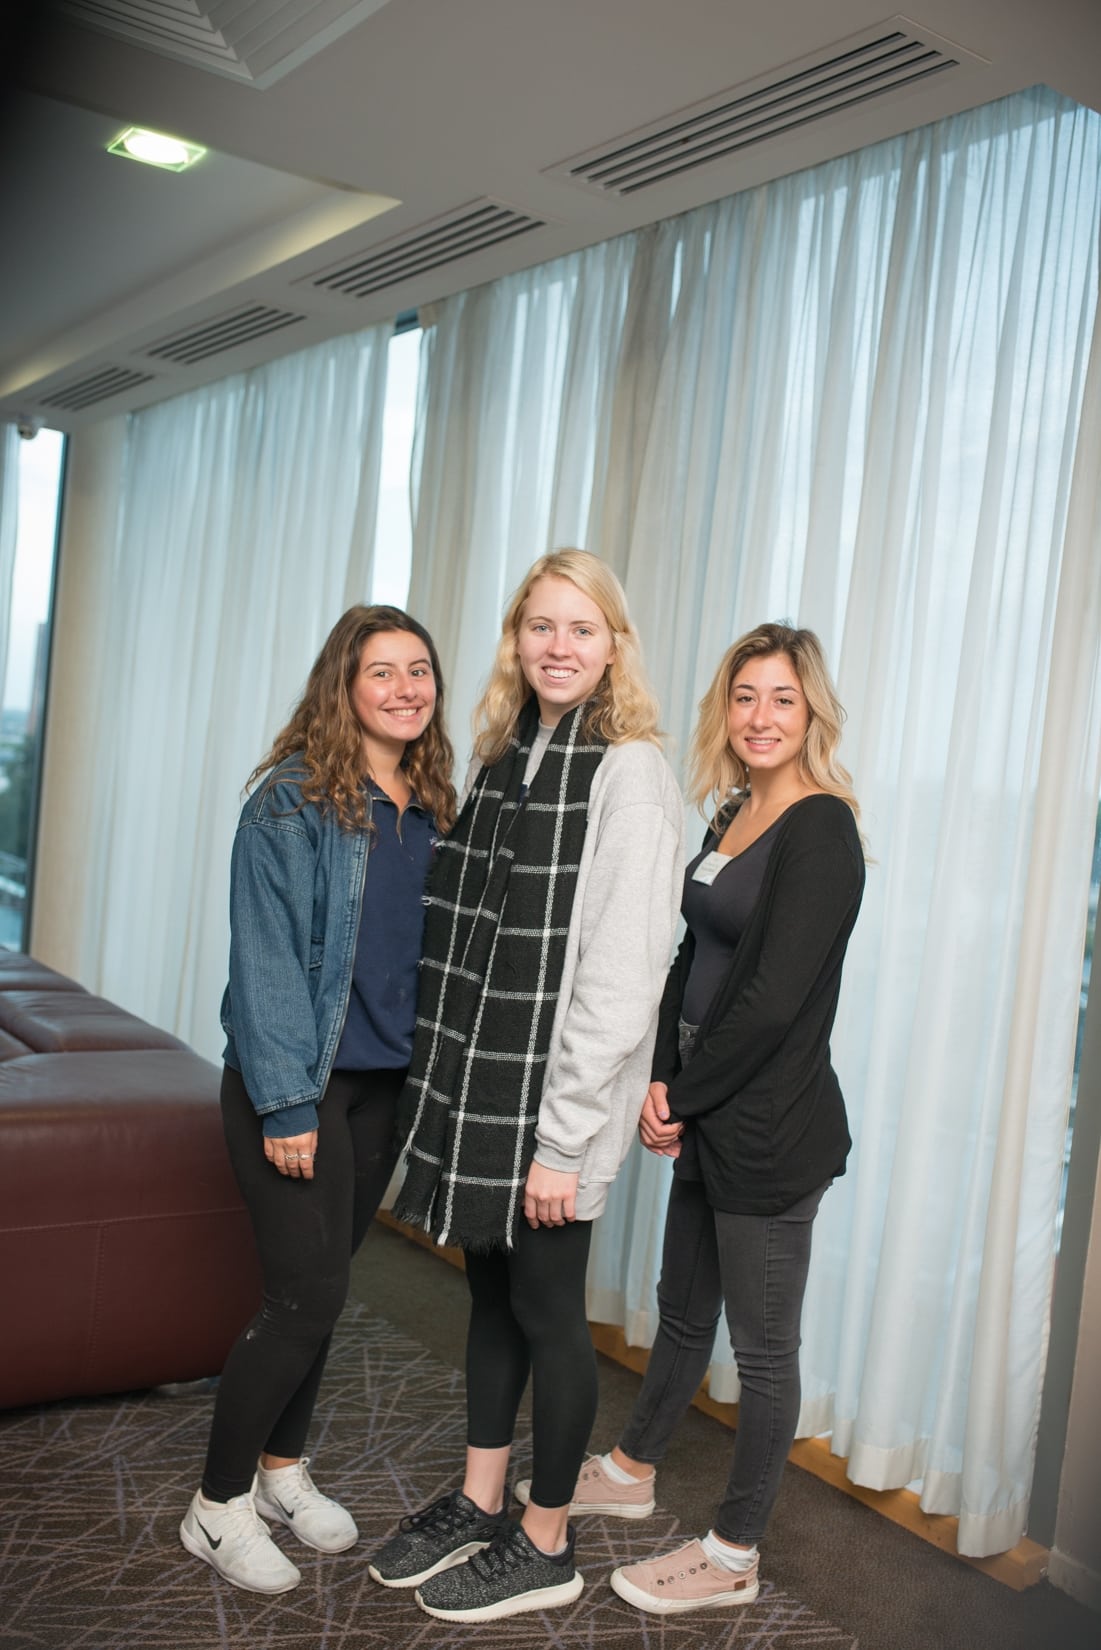 No repro fee-Business Excellence Seminar: Wealth Management. Event sponsored by AIB- 11-09-2018, From Left to Right: Julia Keenan, Sydney Thompson and Daniella Diubaldi all from Mary Immaculate College
Photo credit Shauna Kennedy